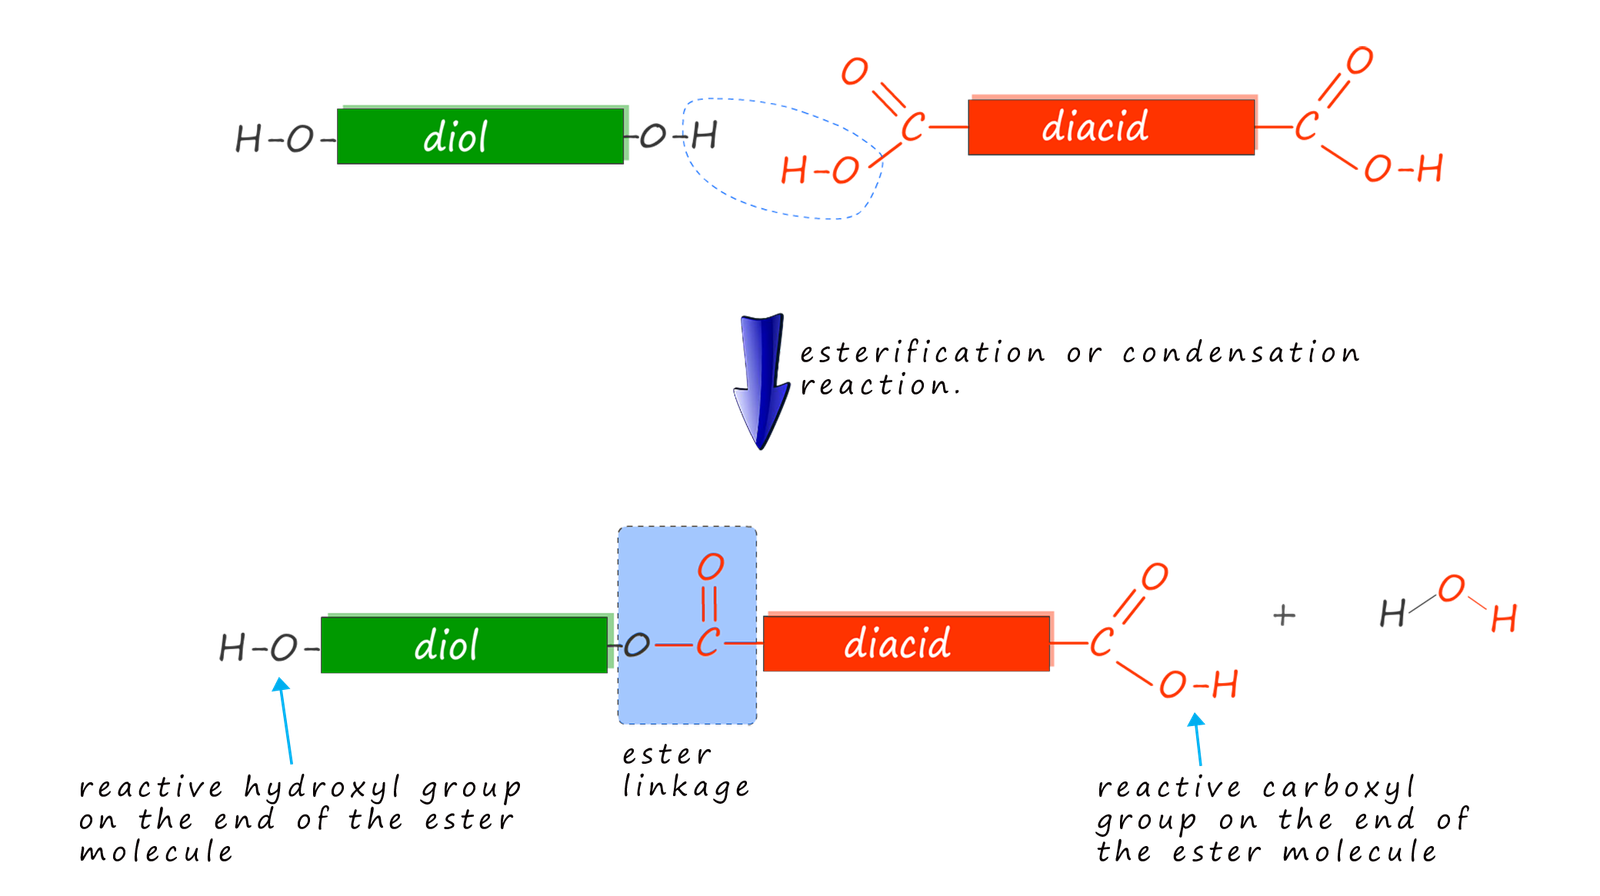 esterification reaction, the formation of ethyl ethanoate from ethanol and ethanoic acid.